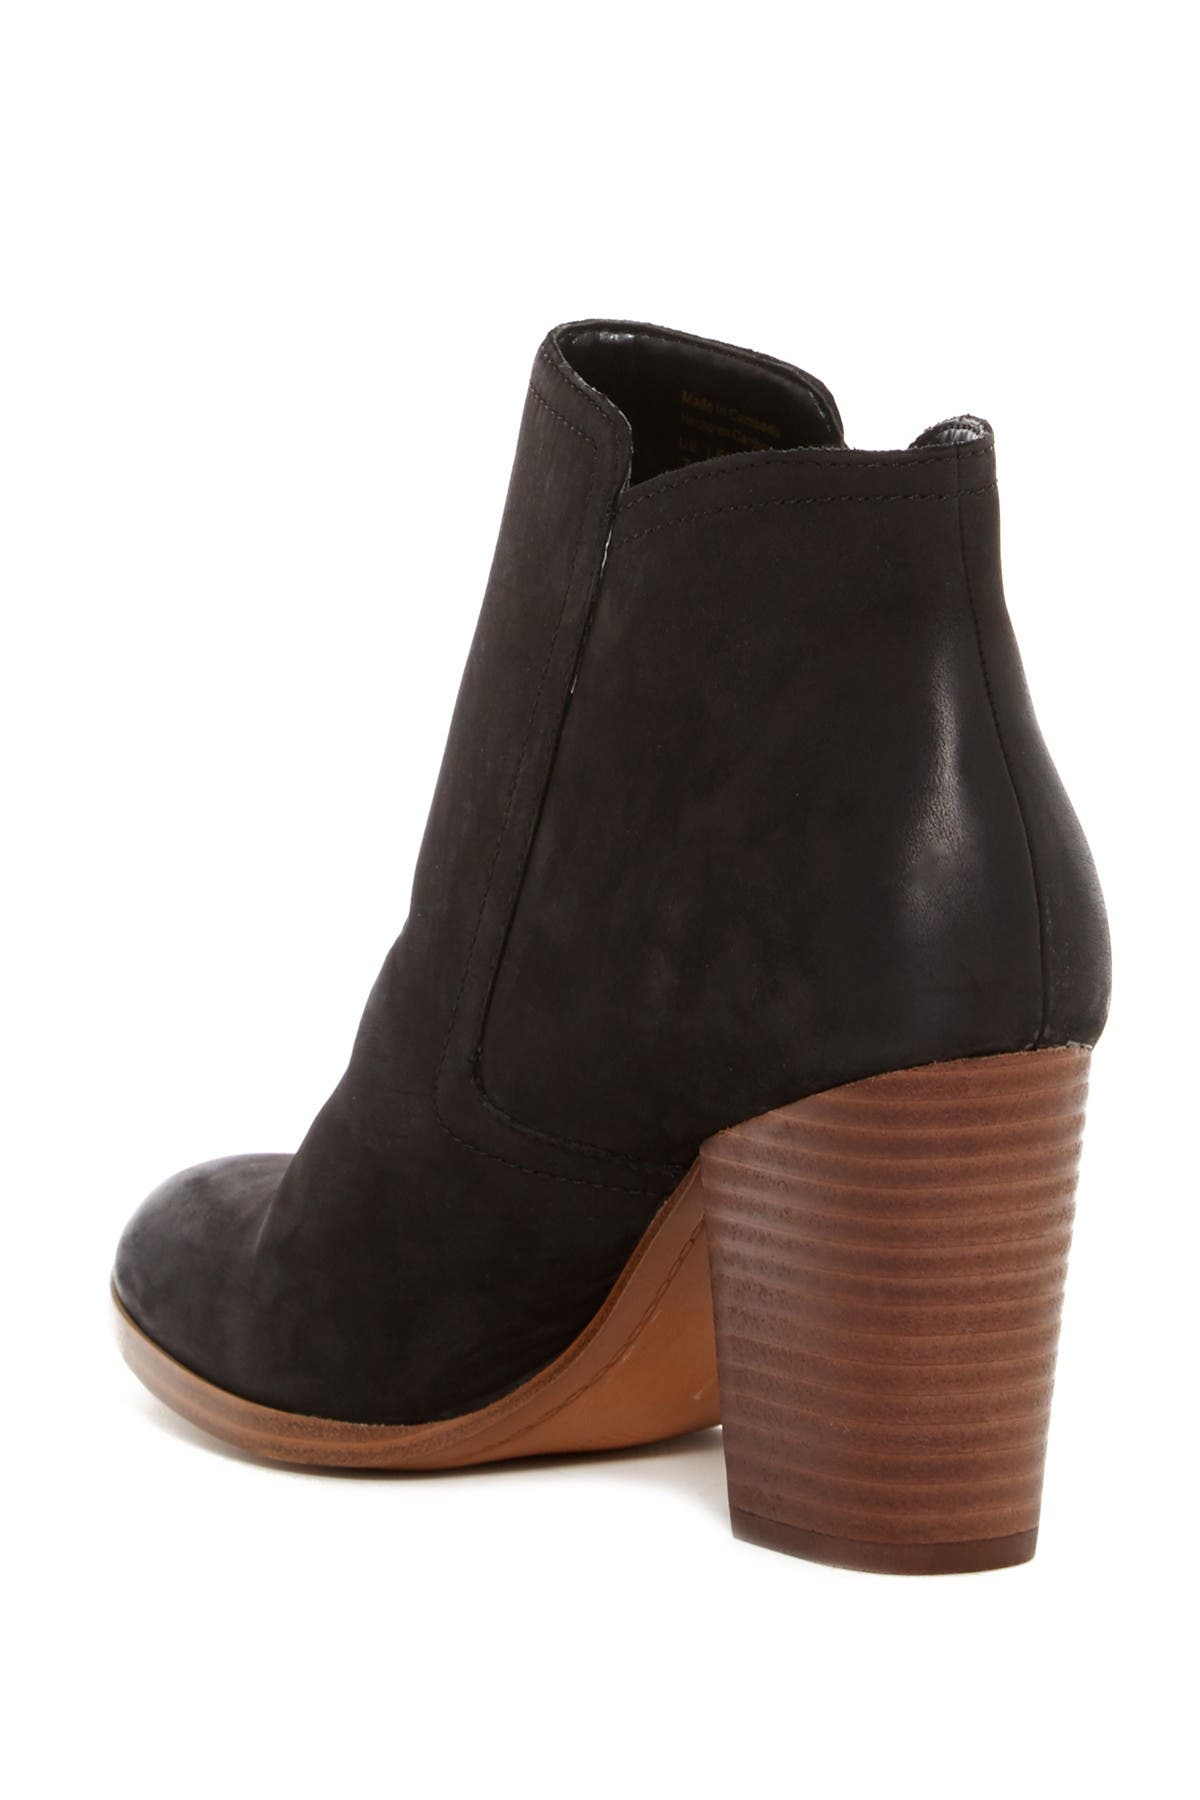 aldo emely ankle boots